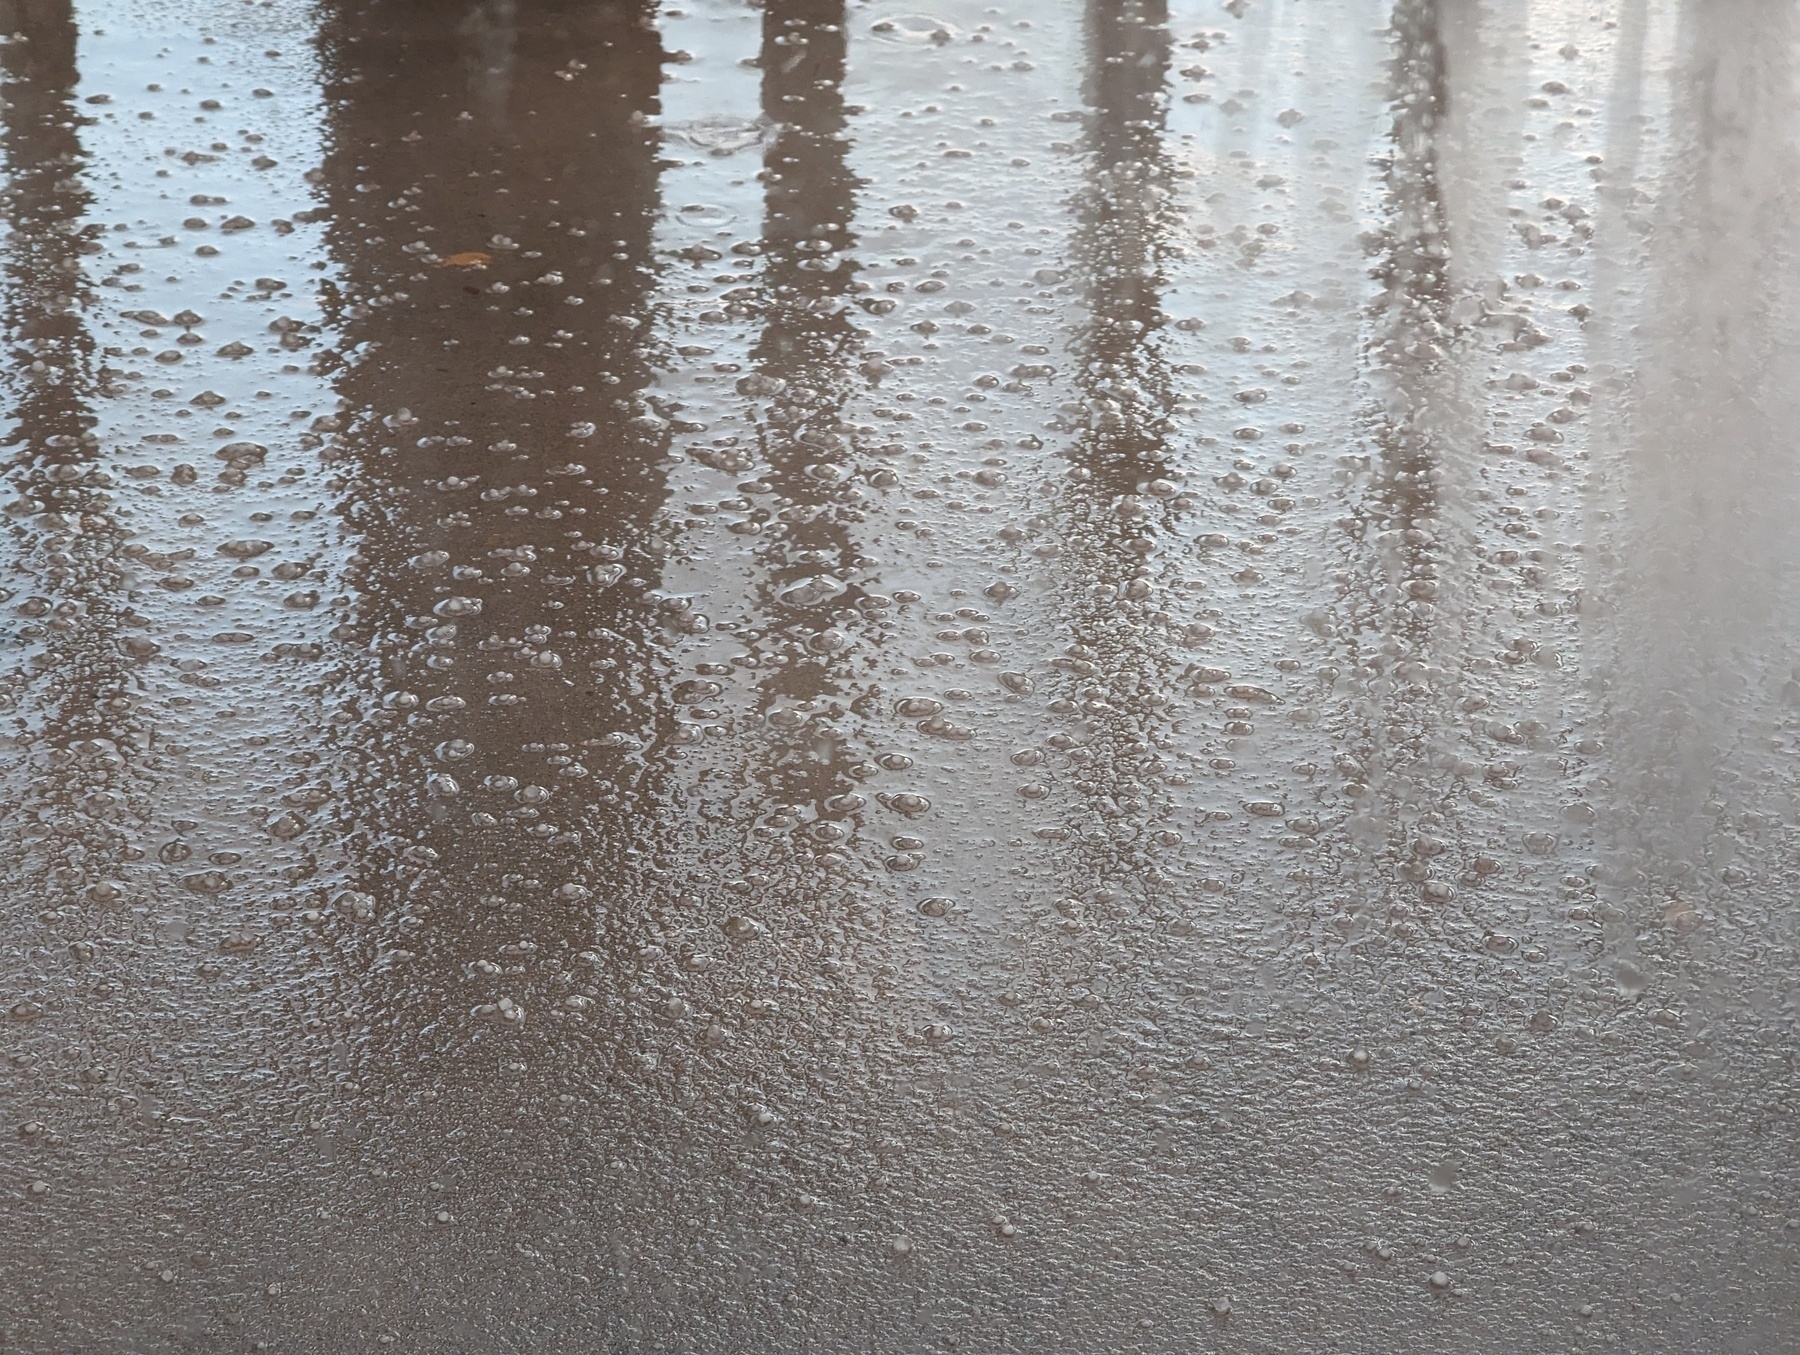 A scattering of hail spread across the patio concrete reflecting nearby wooden railings and wet with fallen rain from one of several storms Monday, March 6, 2023 swinging down from over San Pablo, California.